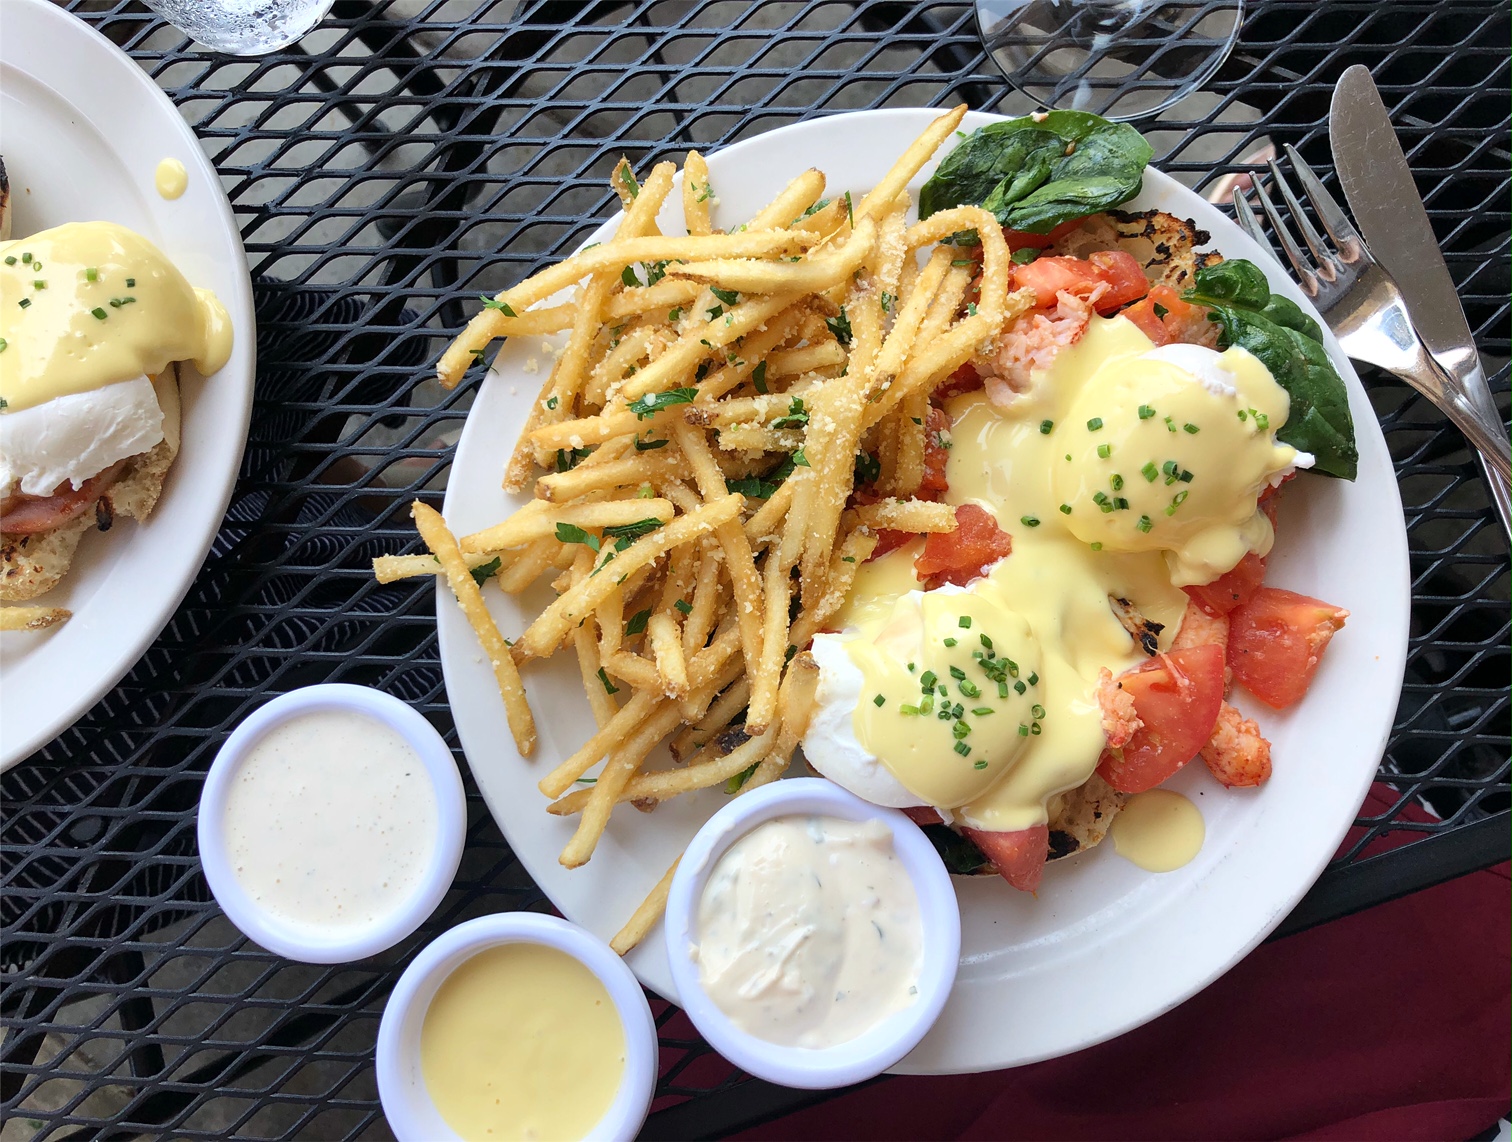 On a black patio table at Sunsinger, there is a white plate with fries and two eggs benedict. There are three small cups of sauces beside the plate. Photo by Alyssa Buckley.